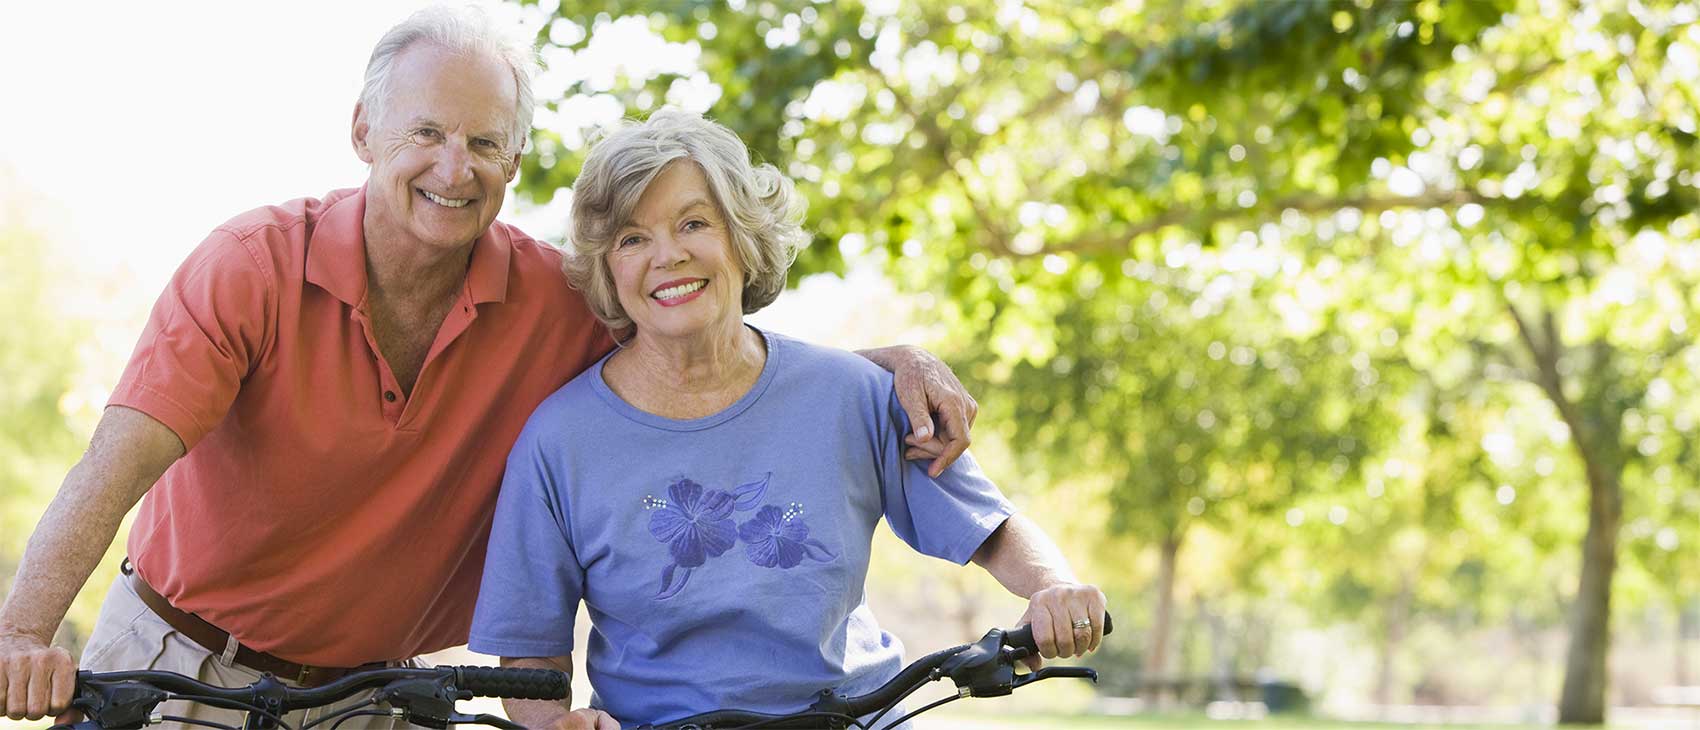 A senior couple smiling with arms around each other